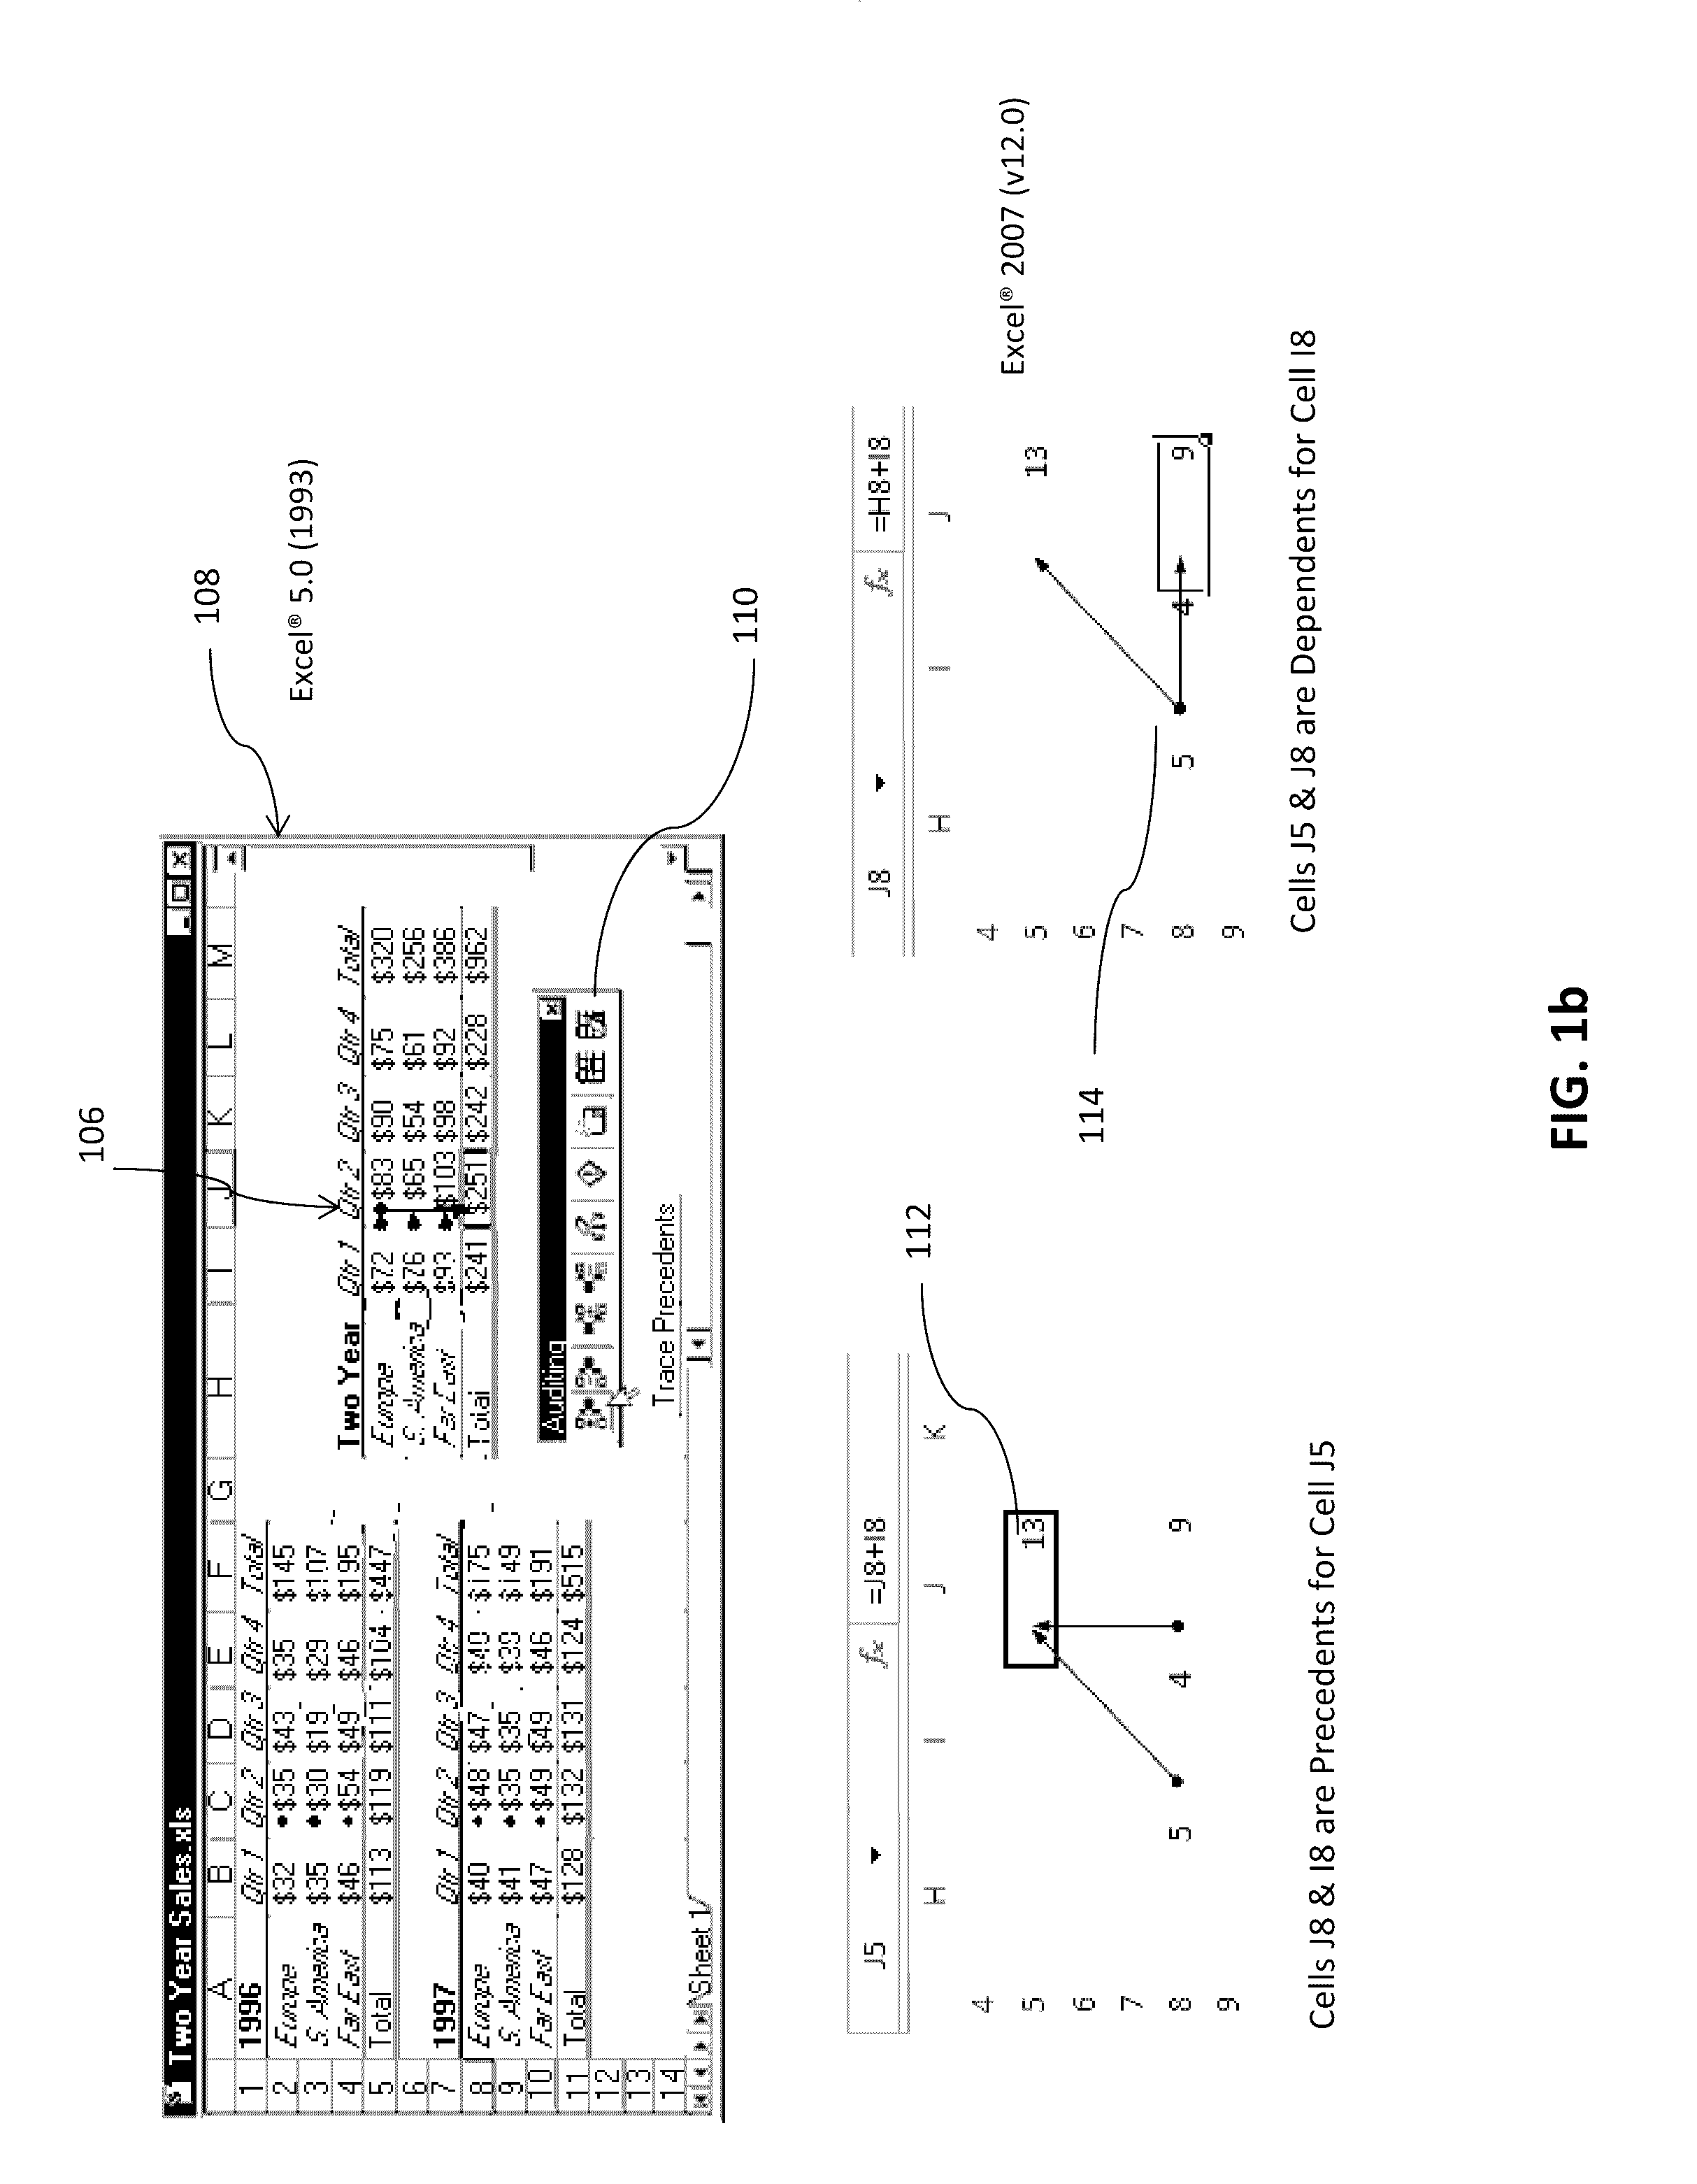 Methods and Systems for Dynamic Graph Generating